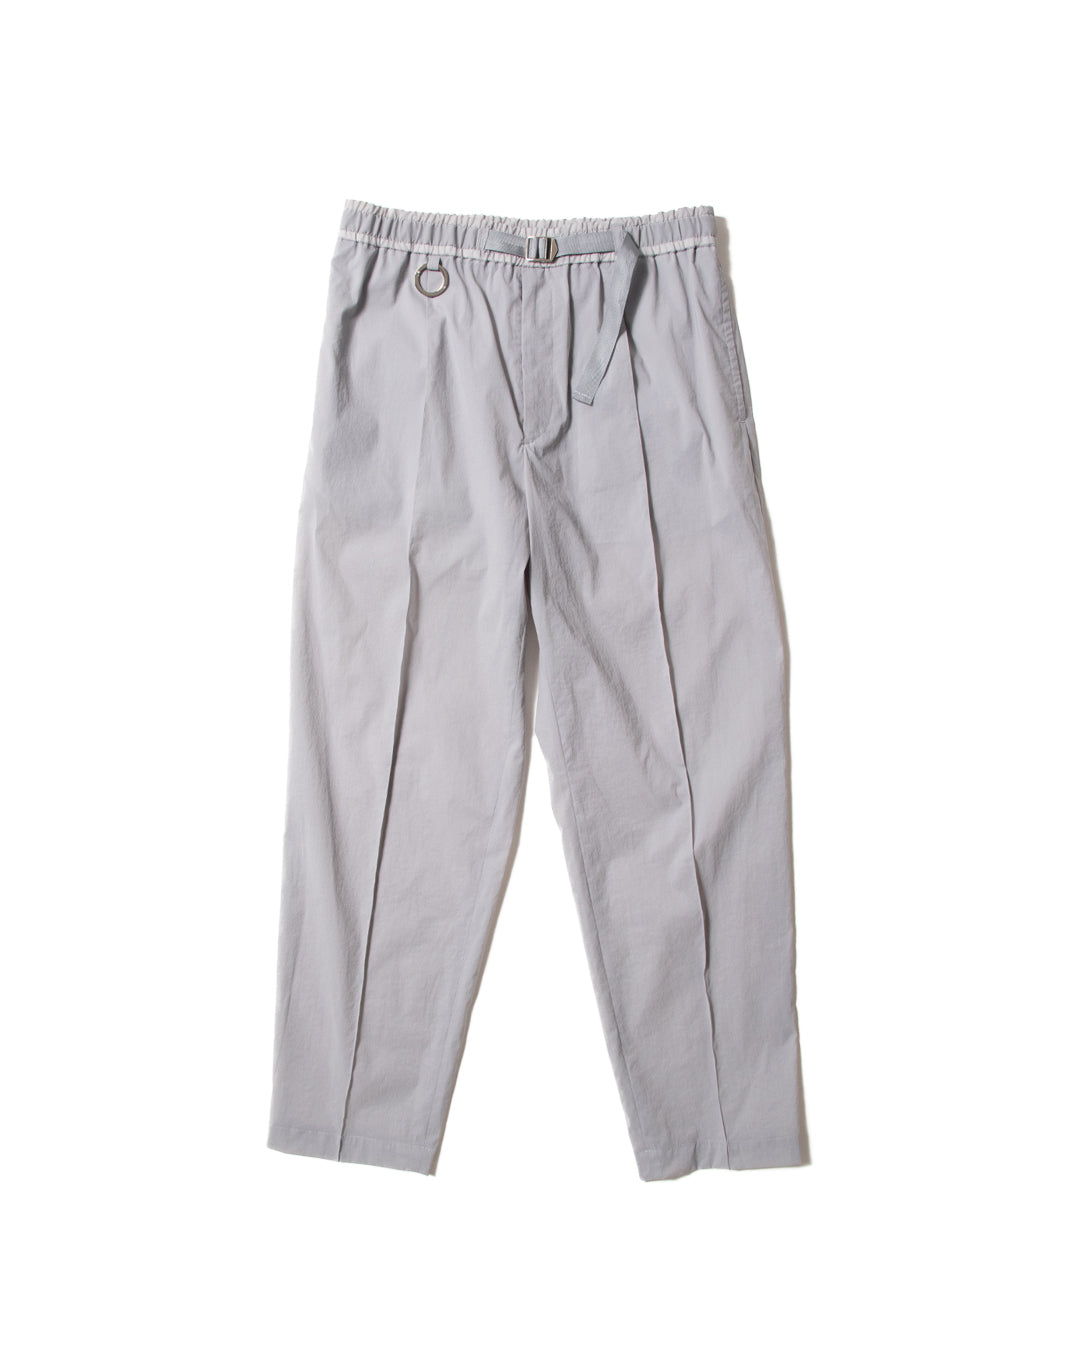 ALBER / JOG PANTS (GRY) - Baby's all right